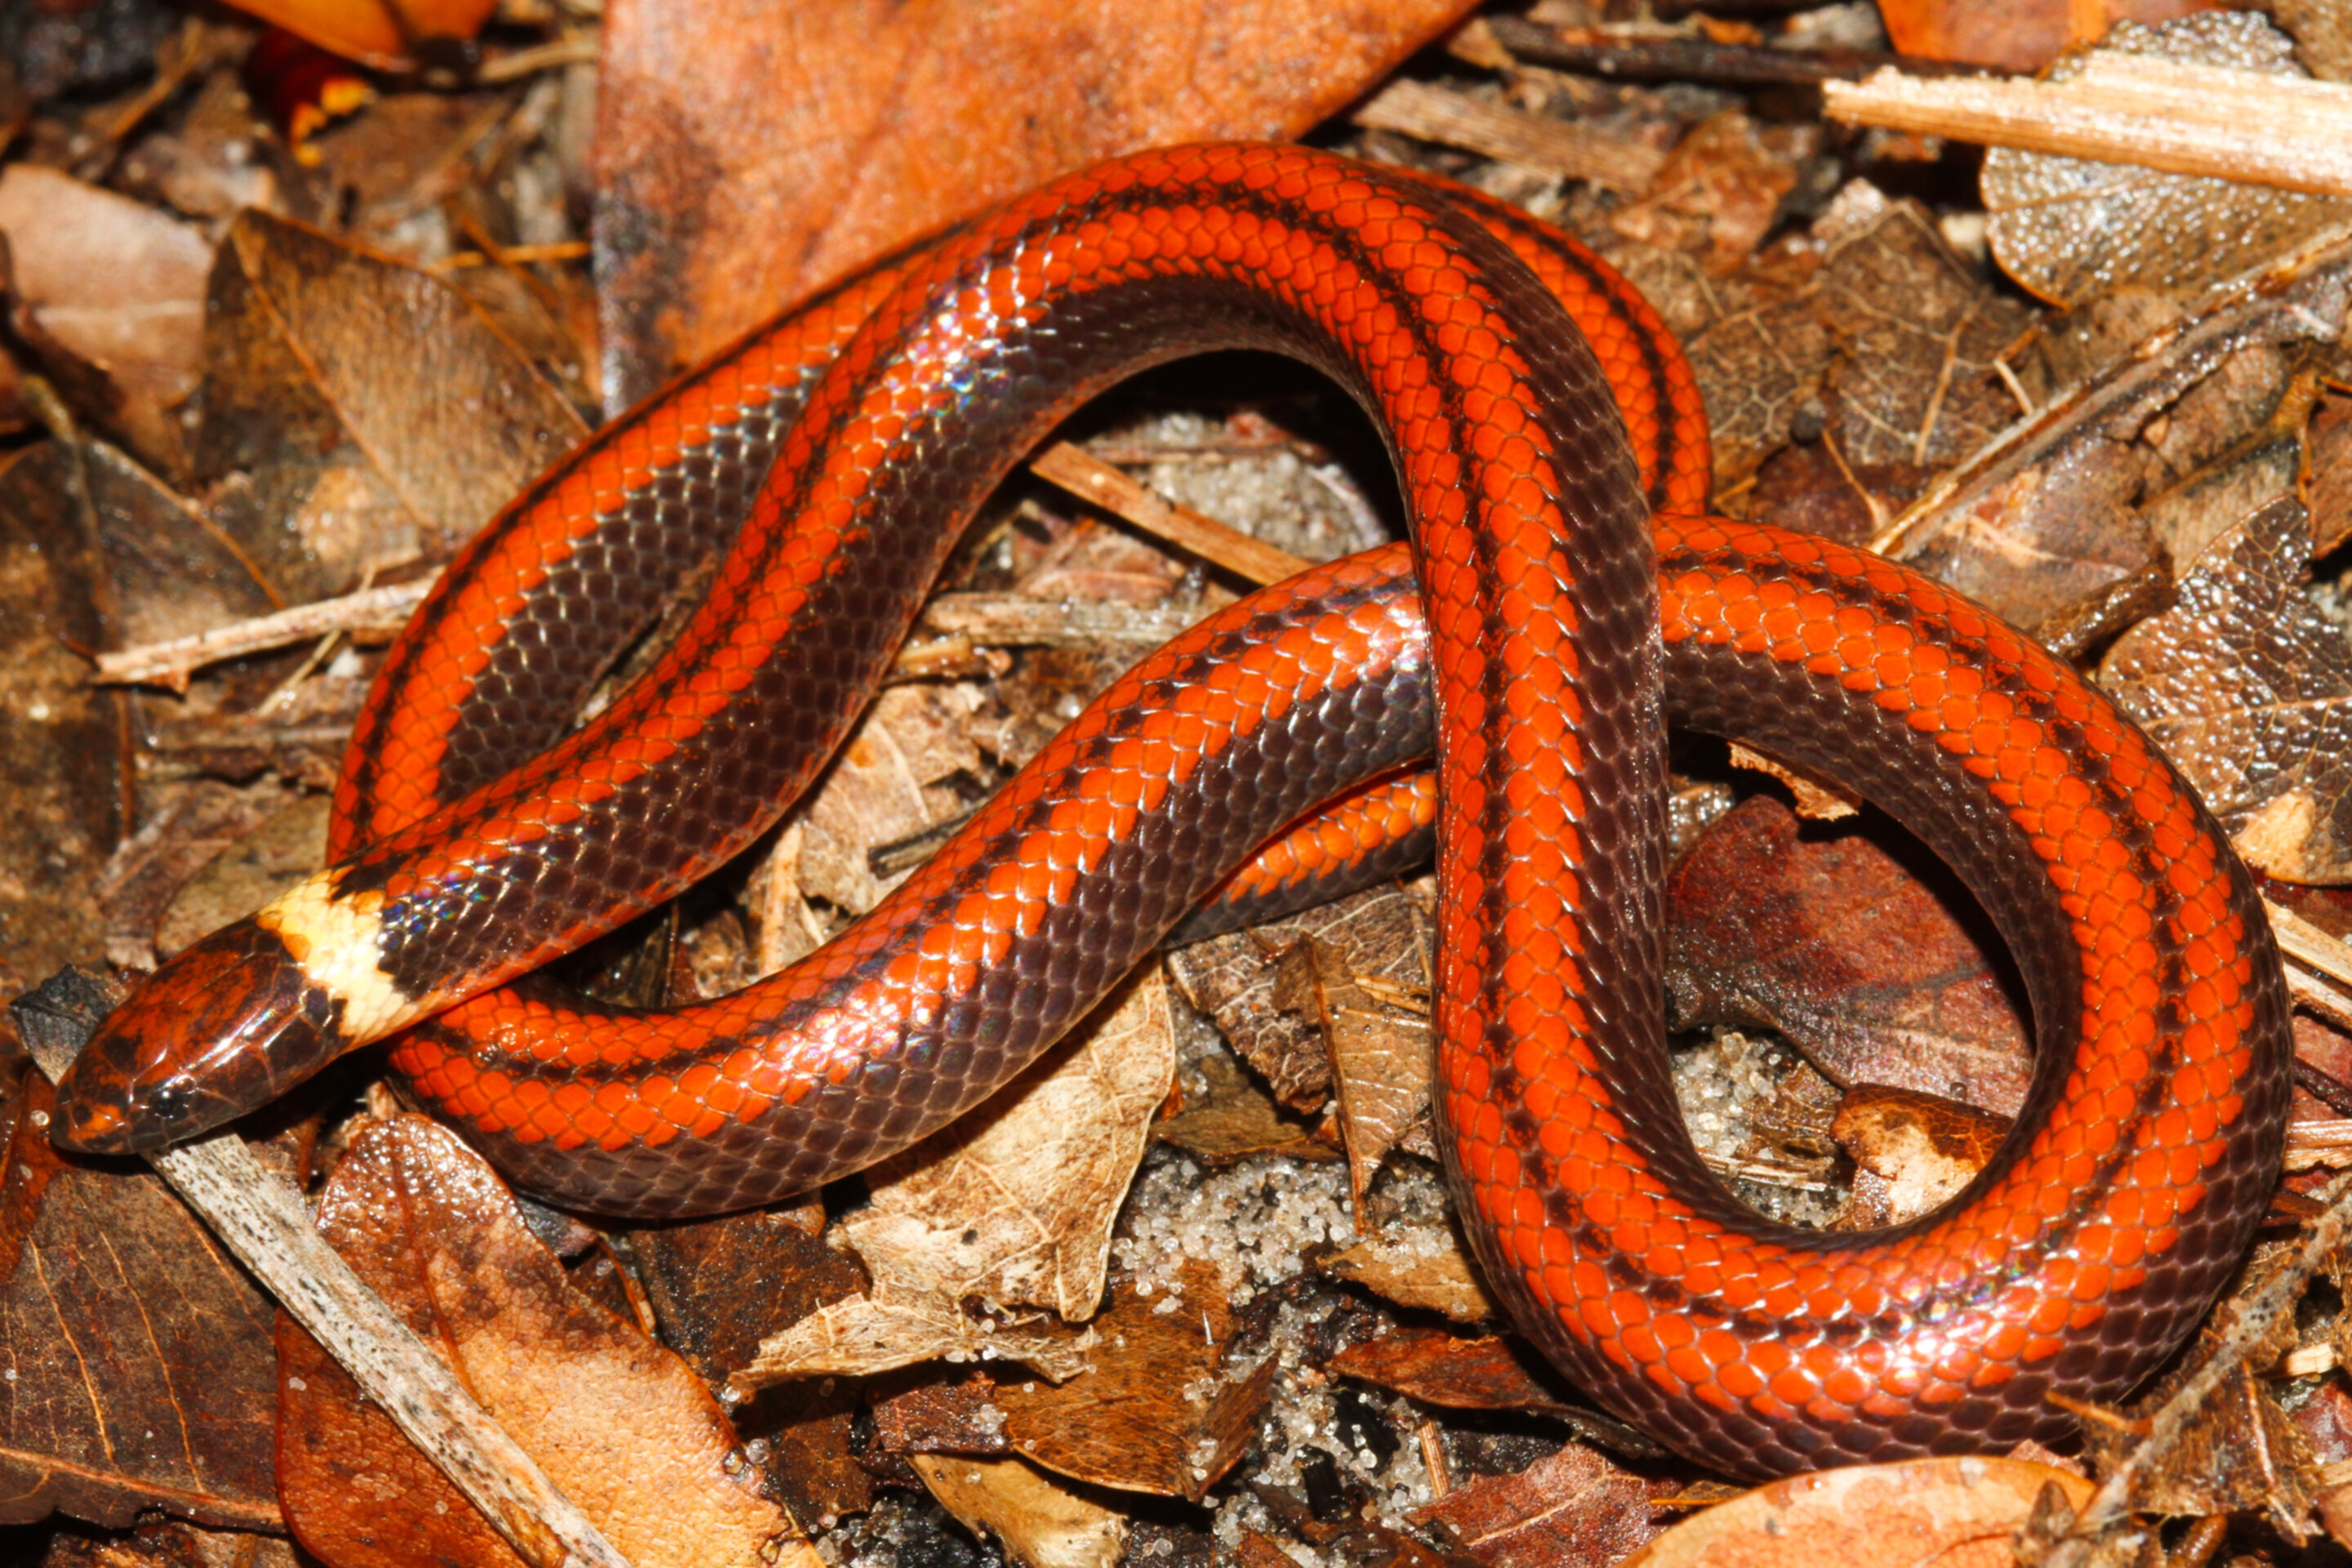 #Striking new snake species discovered in Paraguay